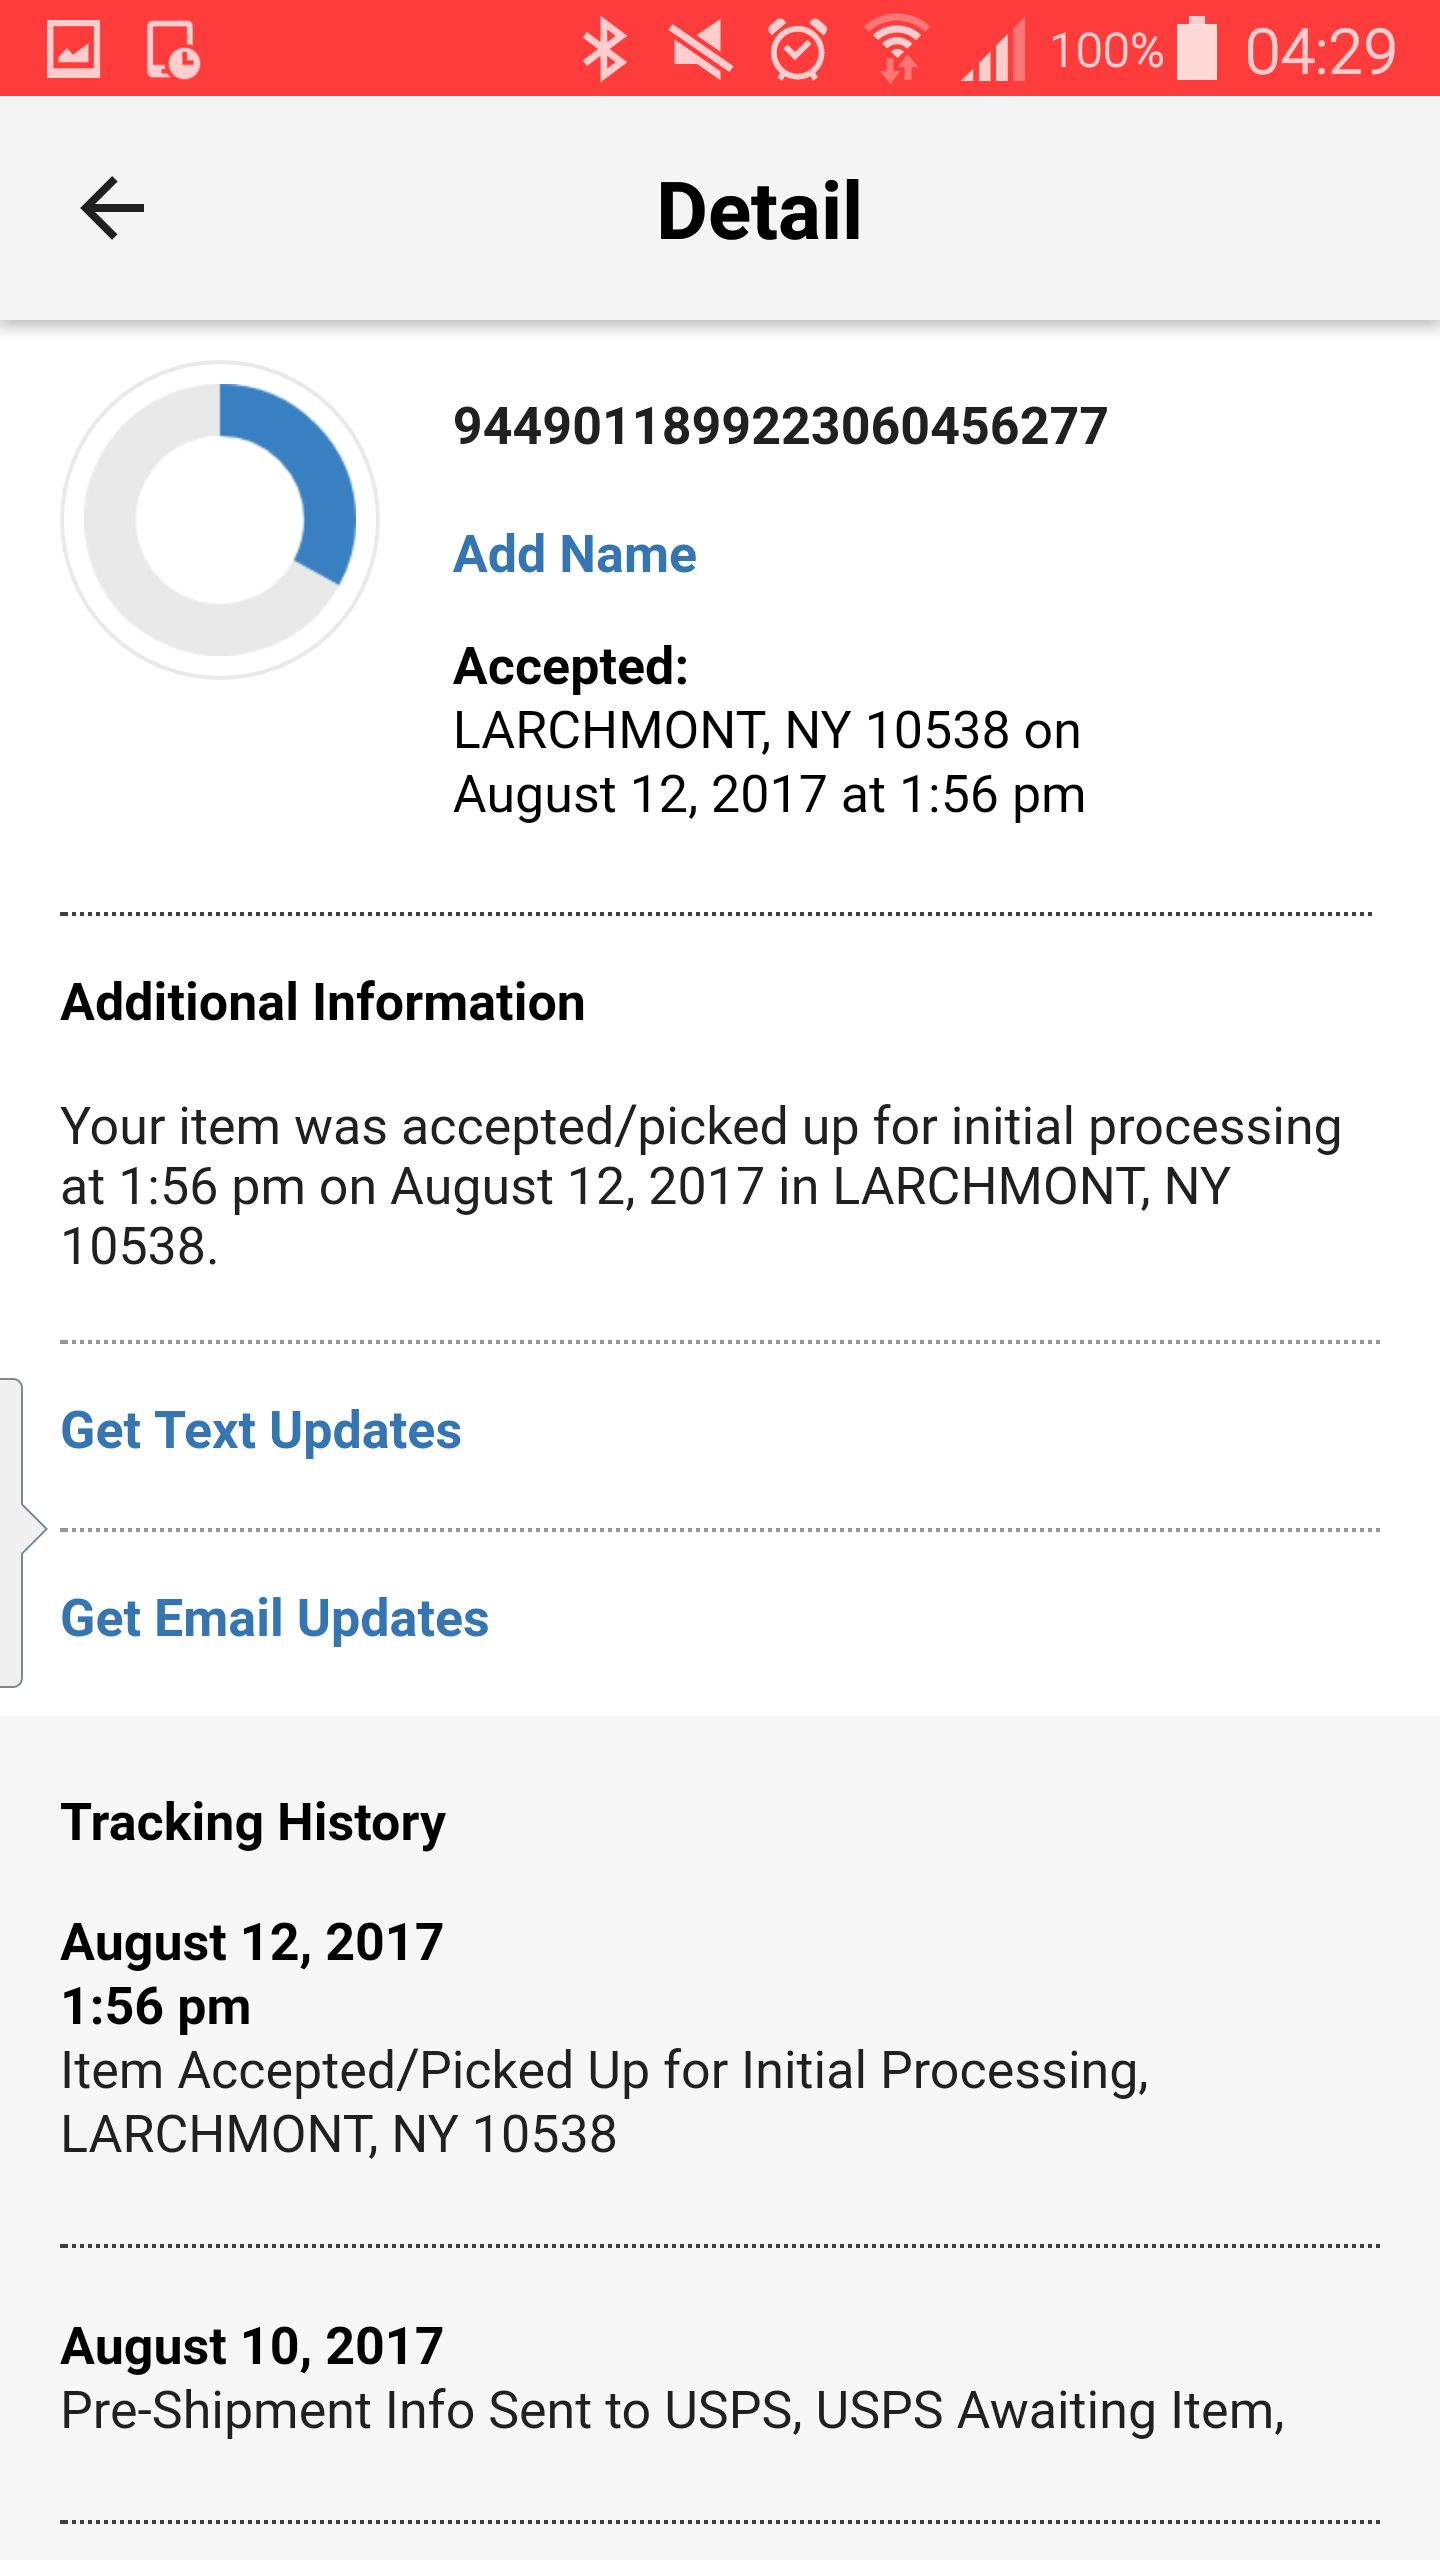 Usps tracking info